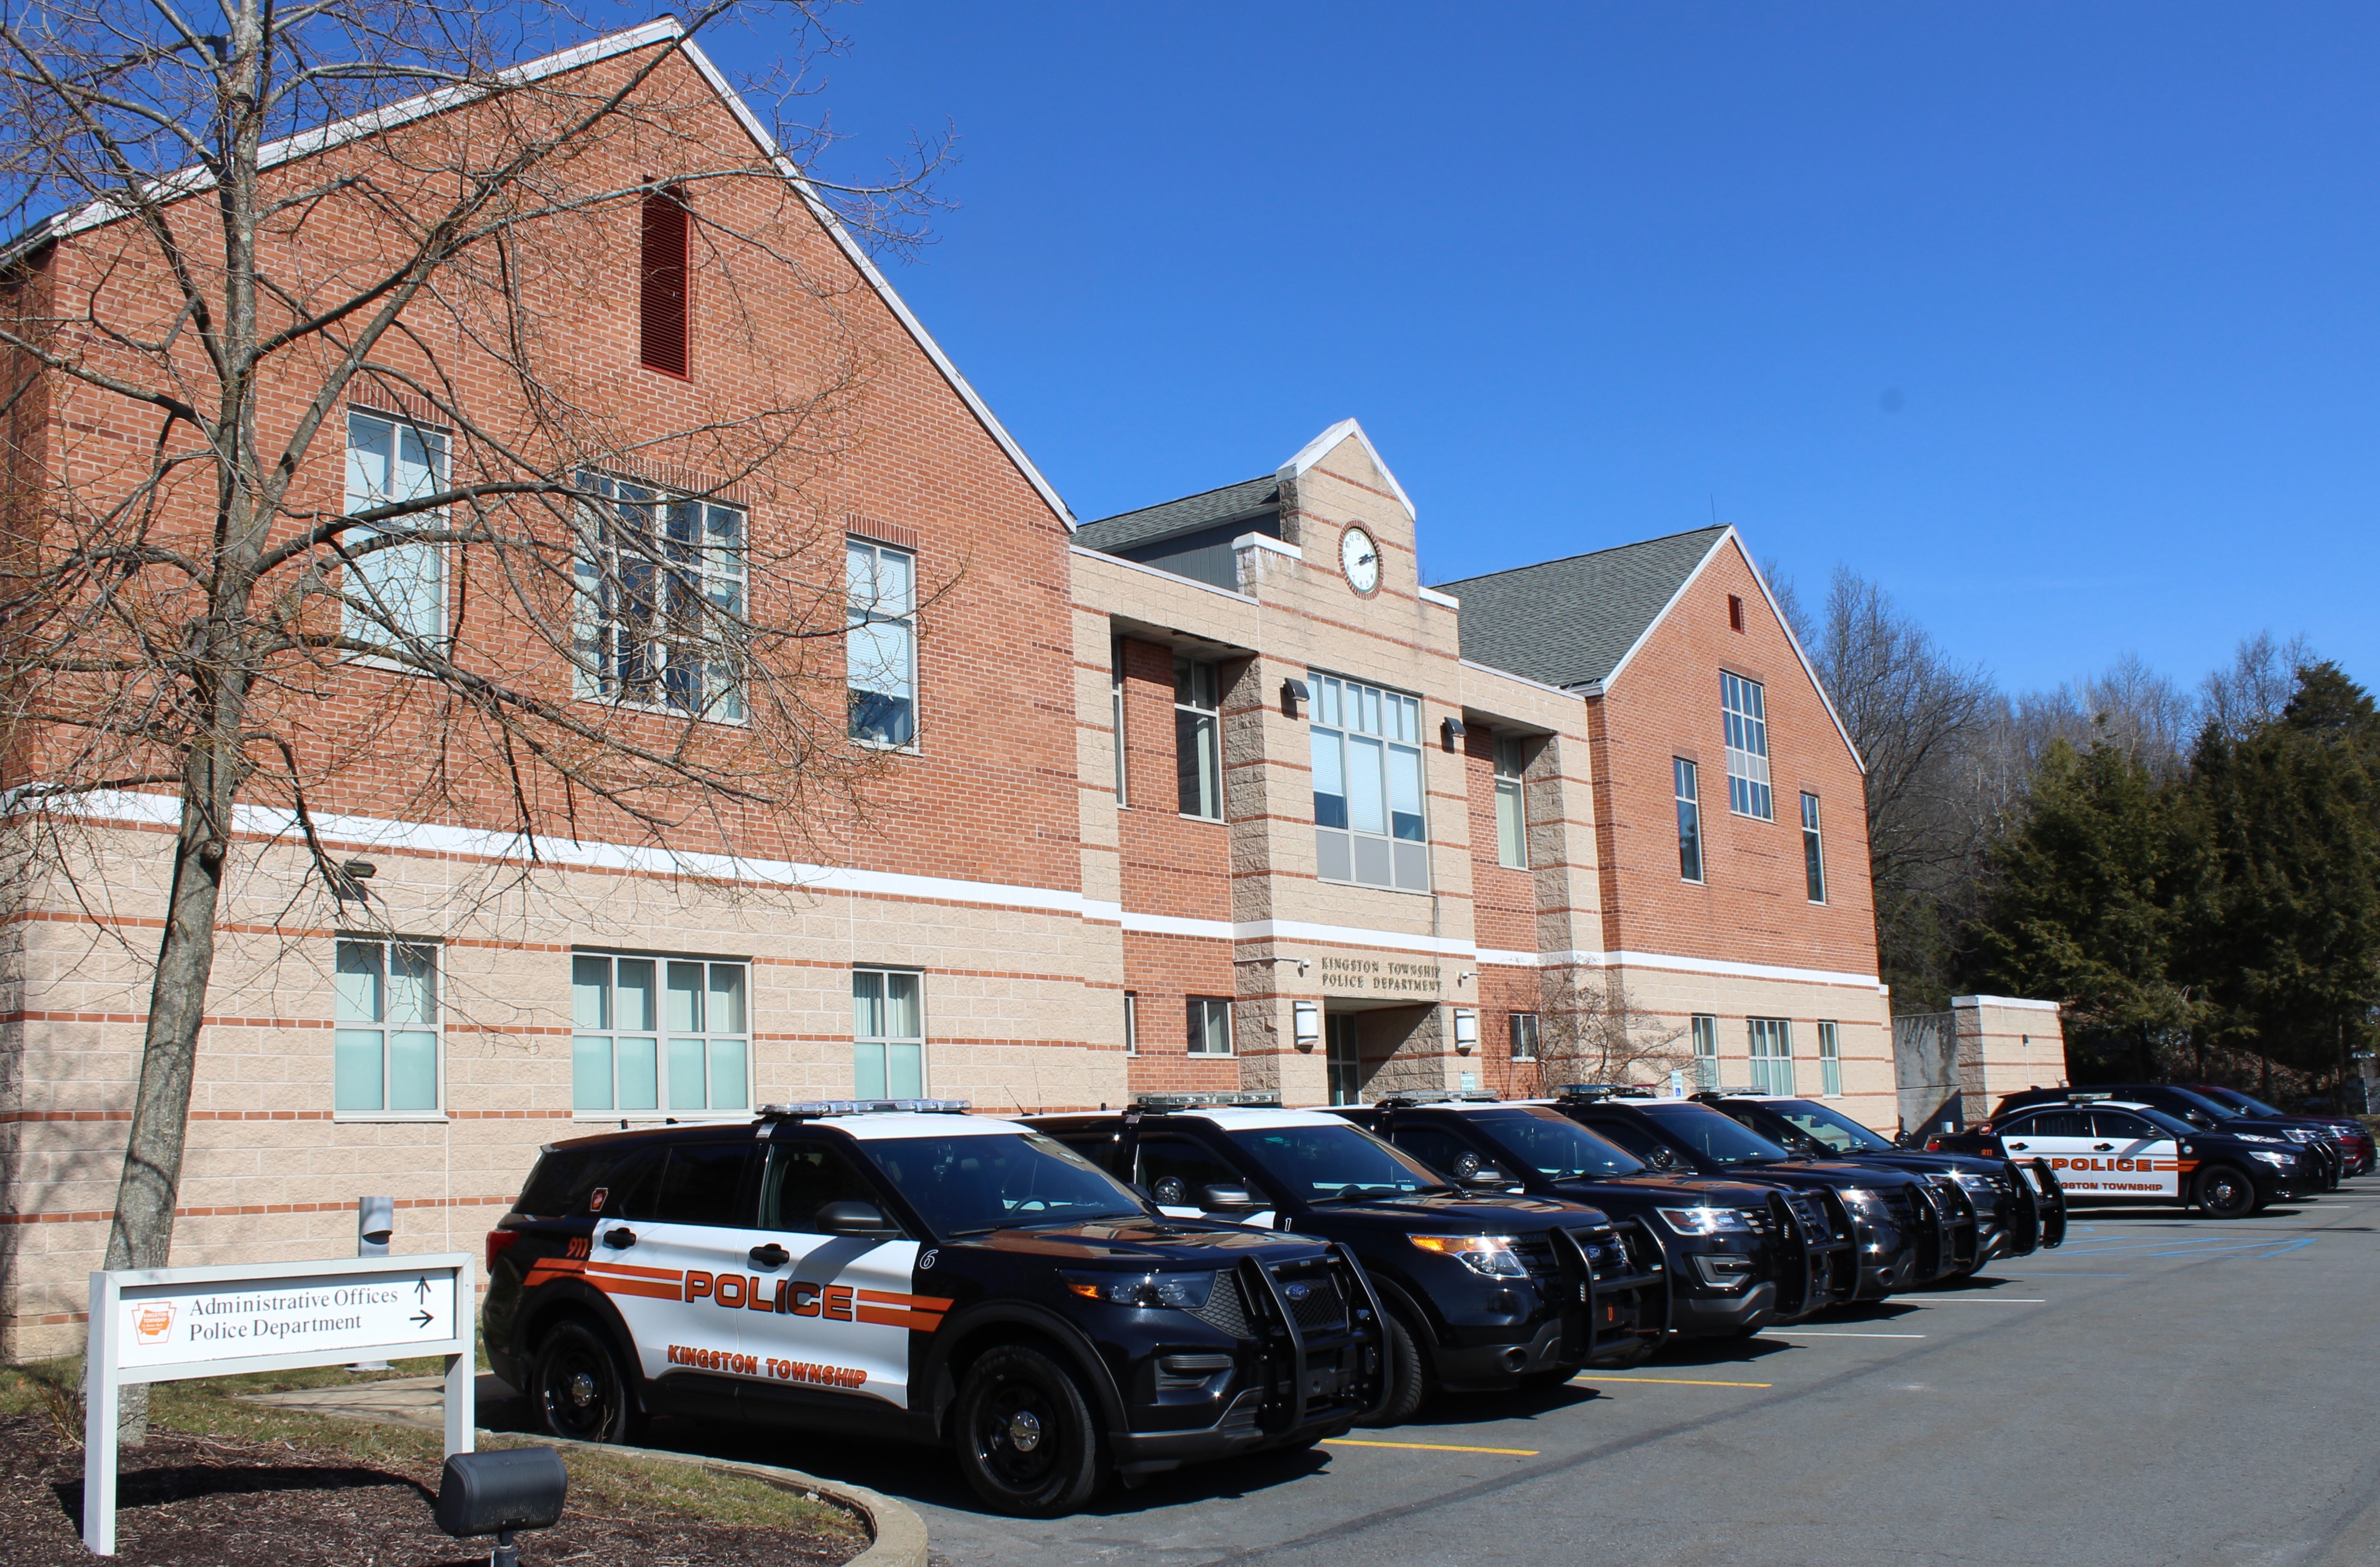 Kingston Township Police Department, PA Public Safety Jobs